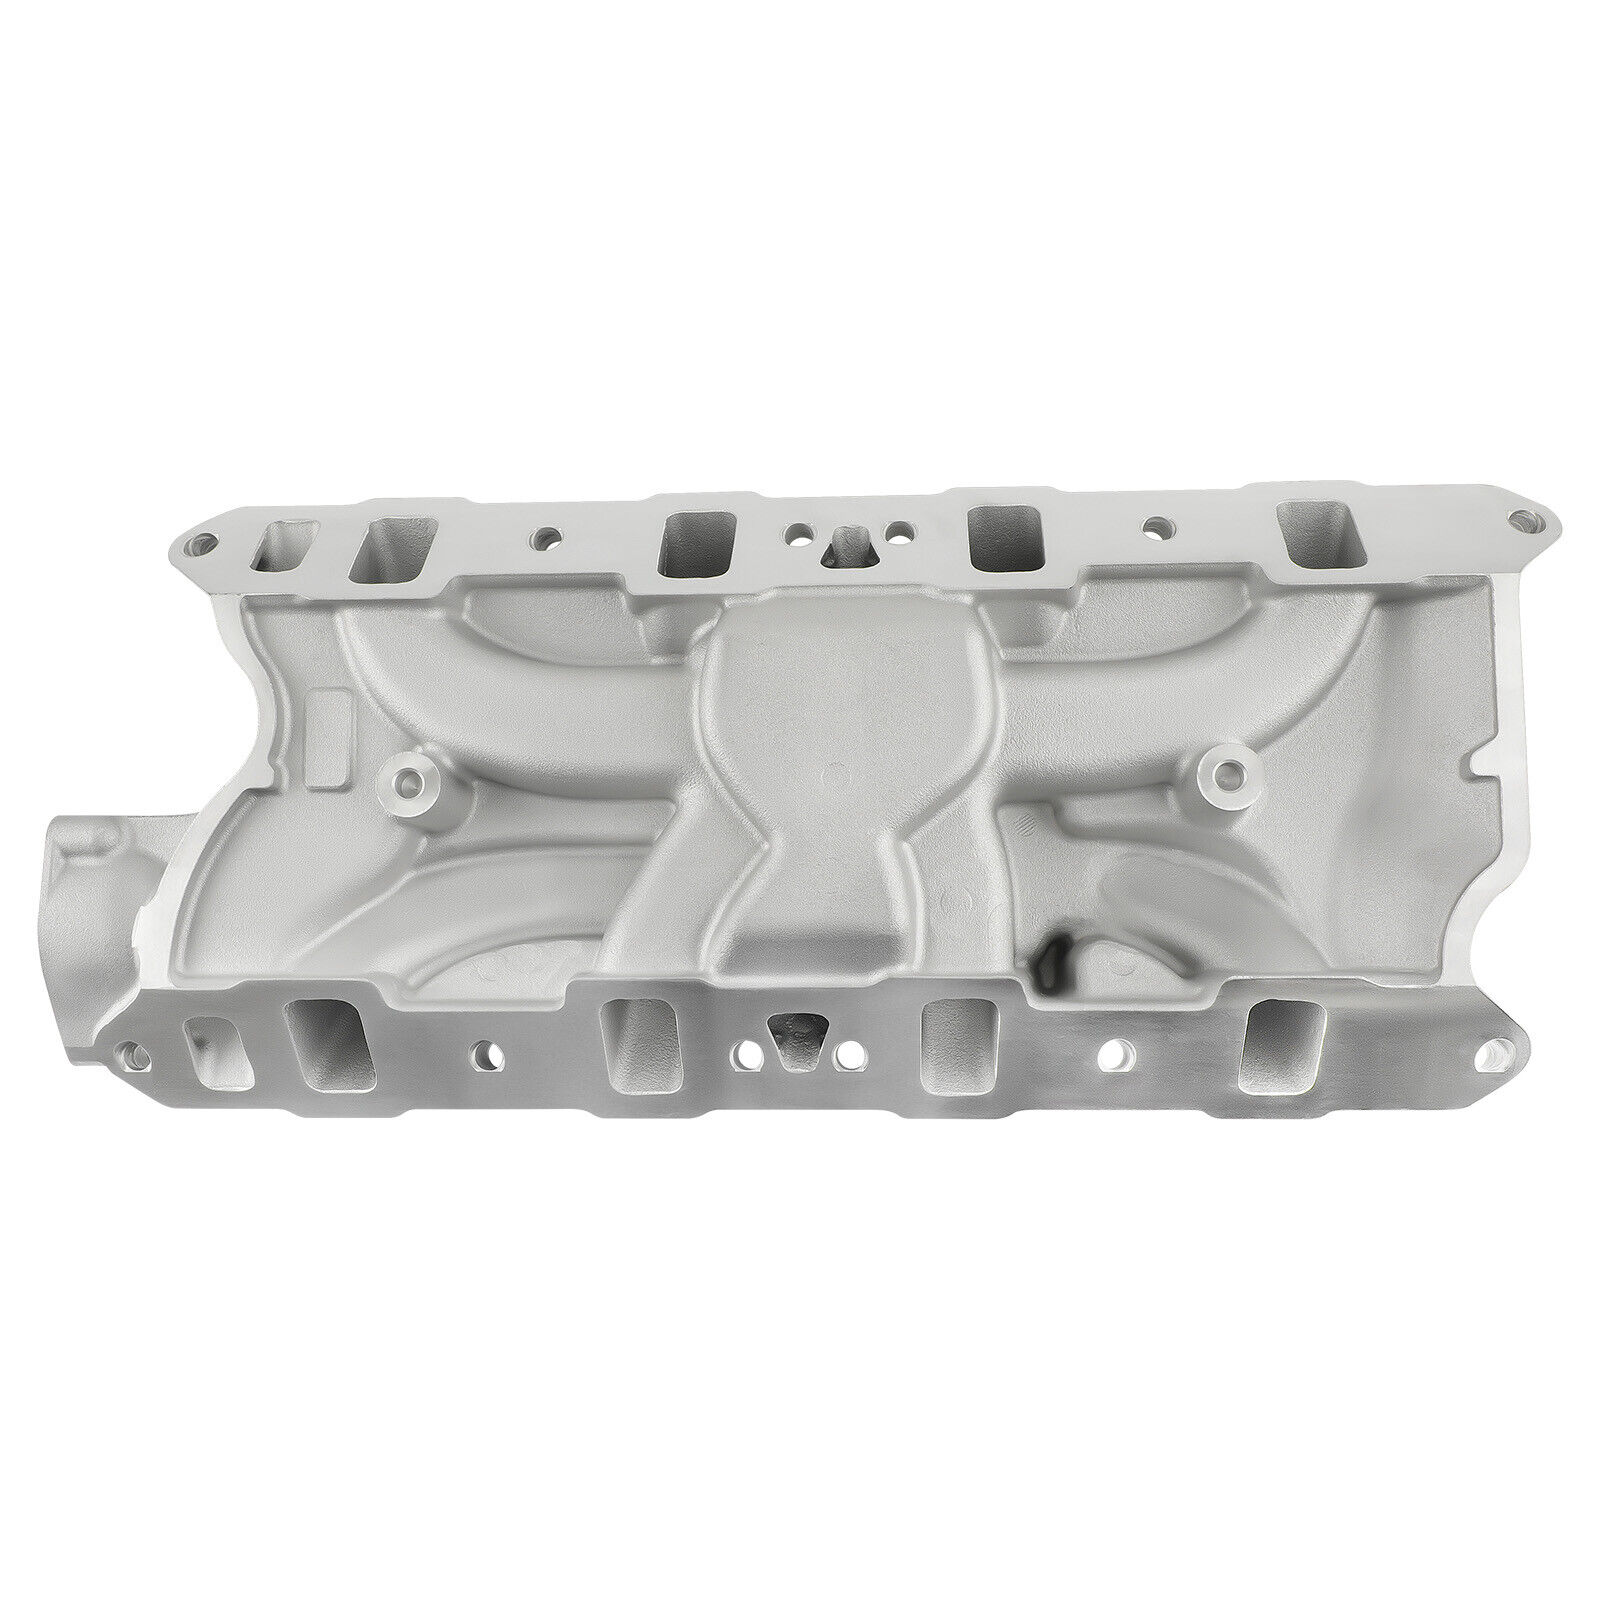 1PC Low Rise Dual Plane Intake Manifold for SBF Small Block Ford V8 260 289 302